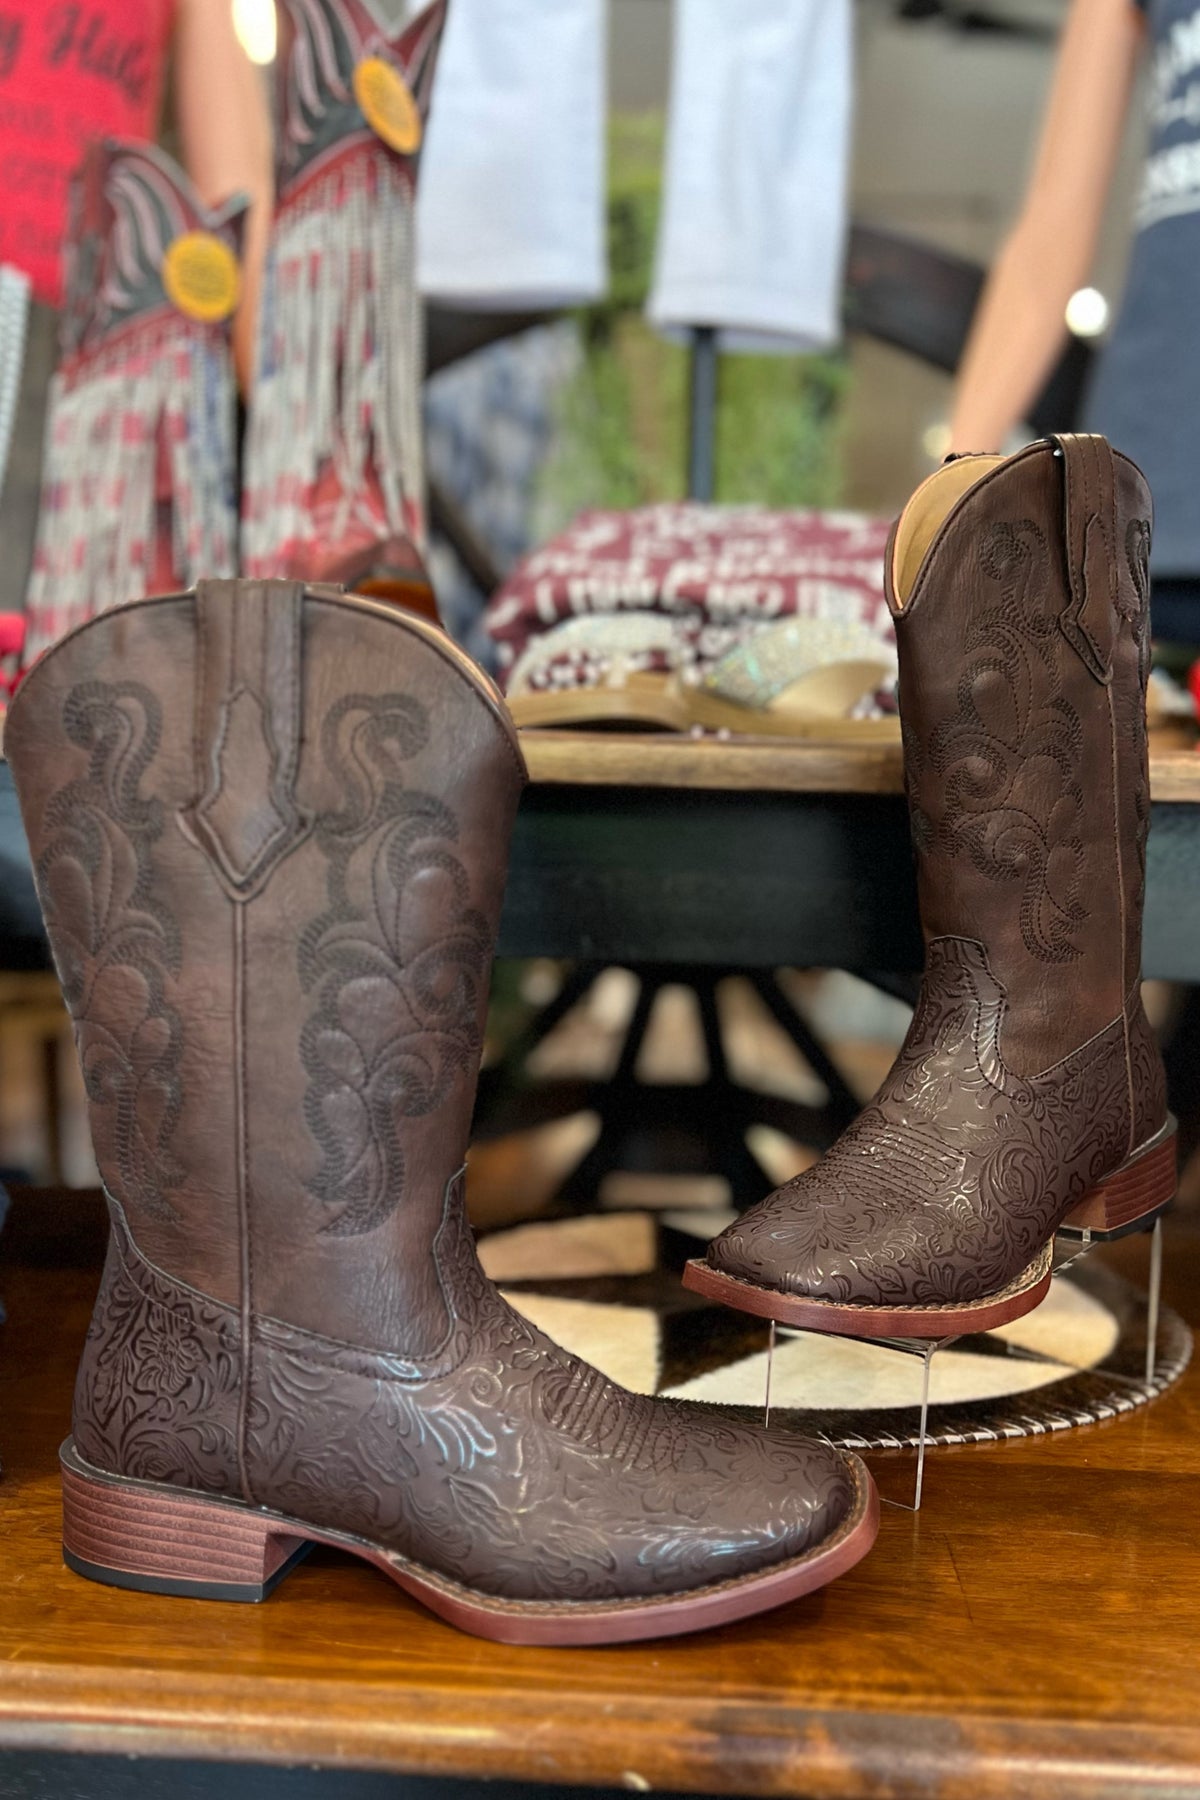 Woman's Roper Kacey Brown Square Toe Boots-Women's Boot-Roper/Stetson-Gallop 'n Glitz- Women's Western Wear Boutique, Located in Grants Pass, Oregon